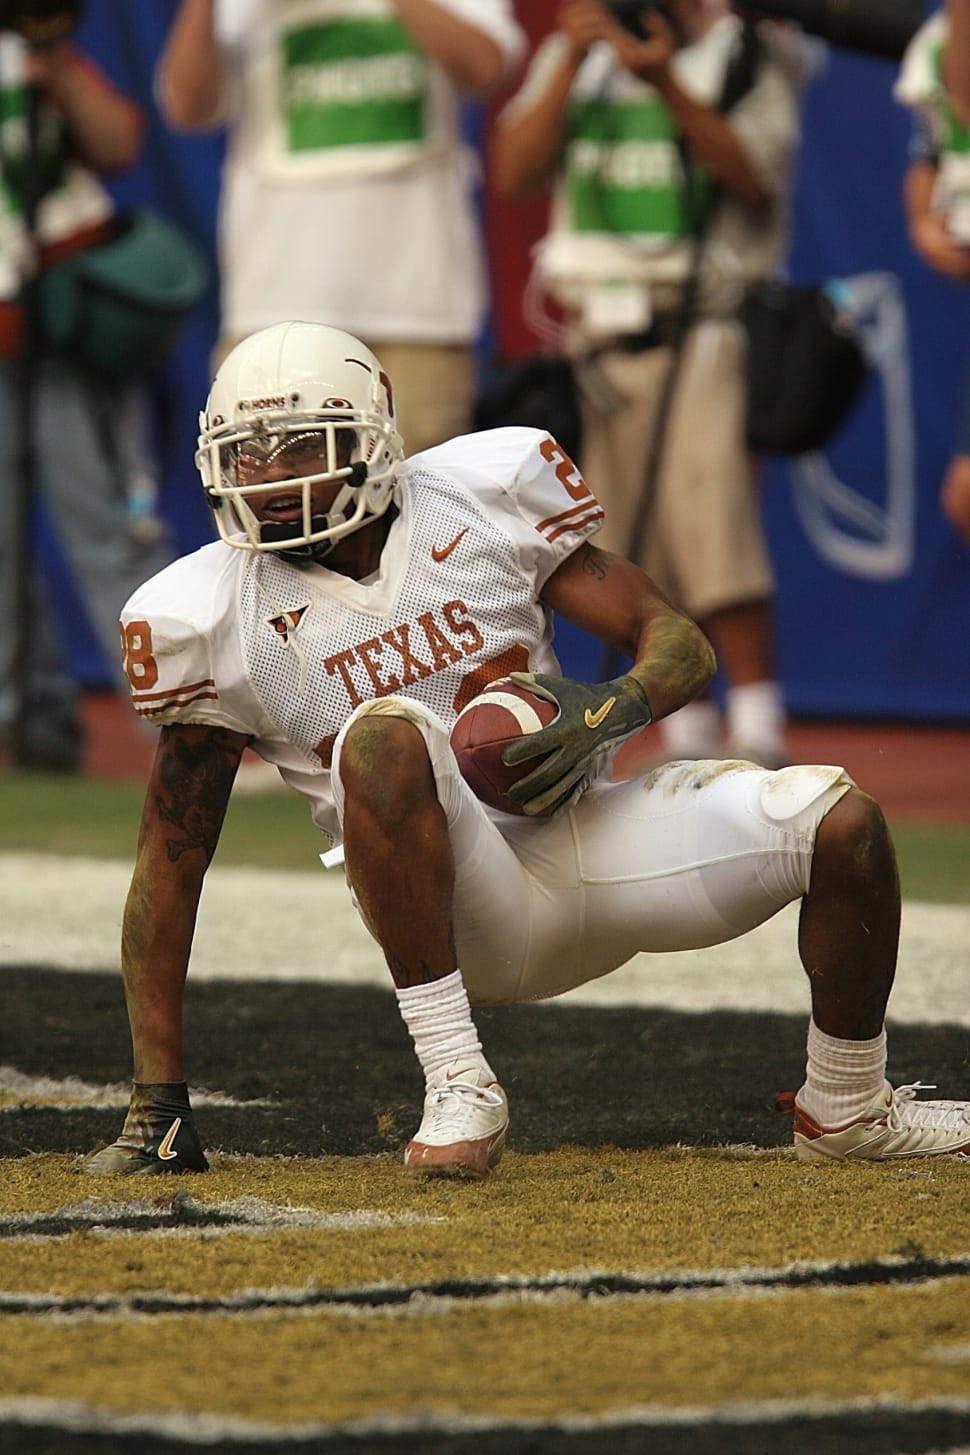 Texas football player preview